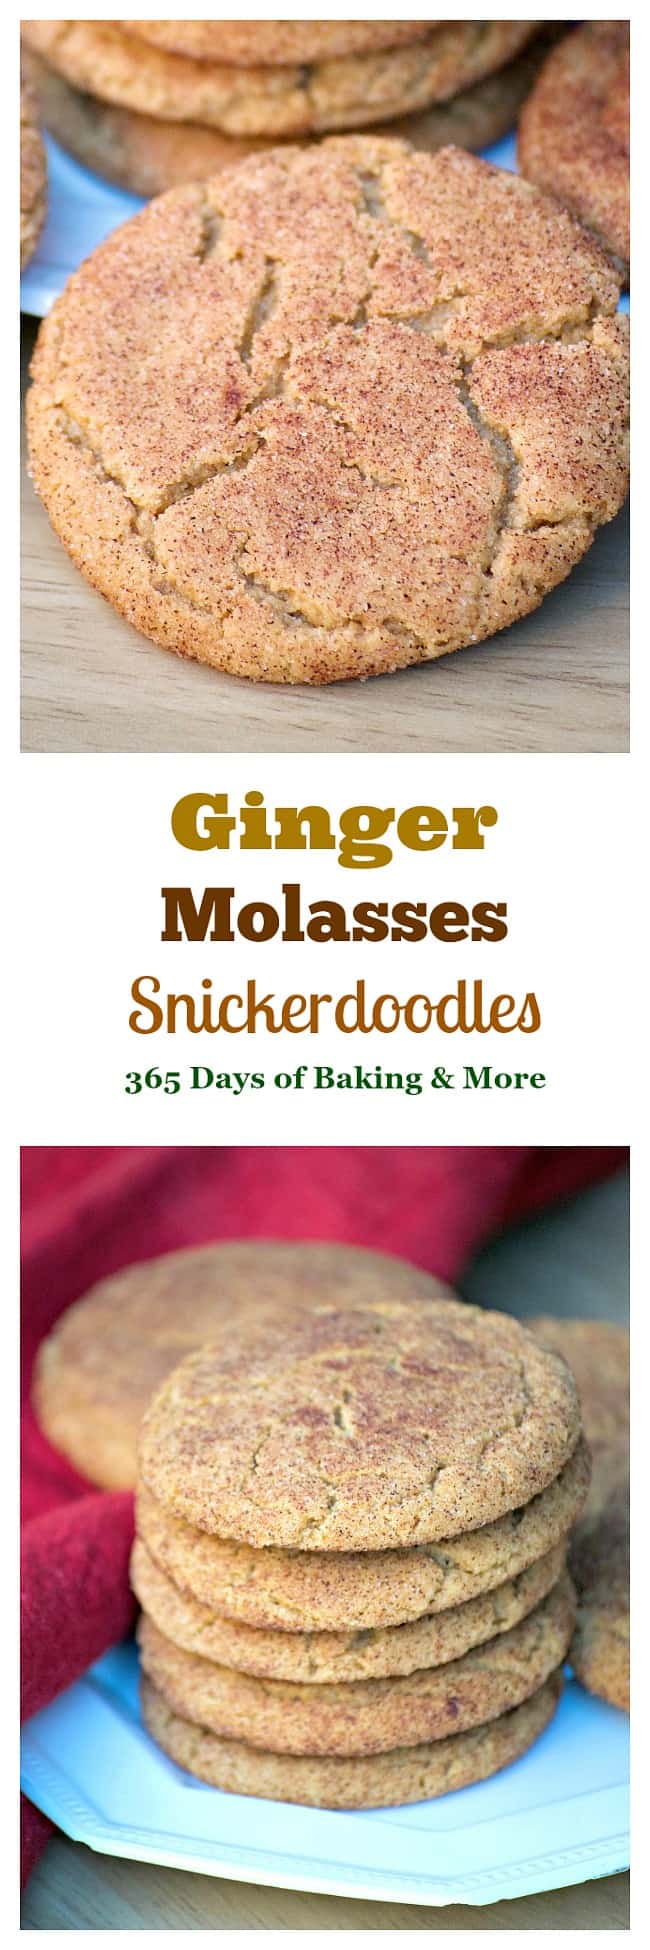 These Ginger Molasses Snickerdoodles are chewy cinnamon sugar cookies with the addition of ginger and molasses - the perfect Snickerdoodle for the holidays!